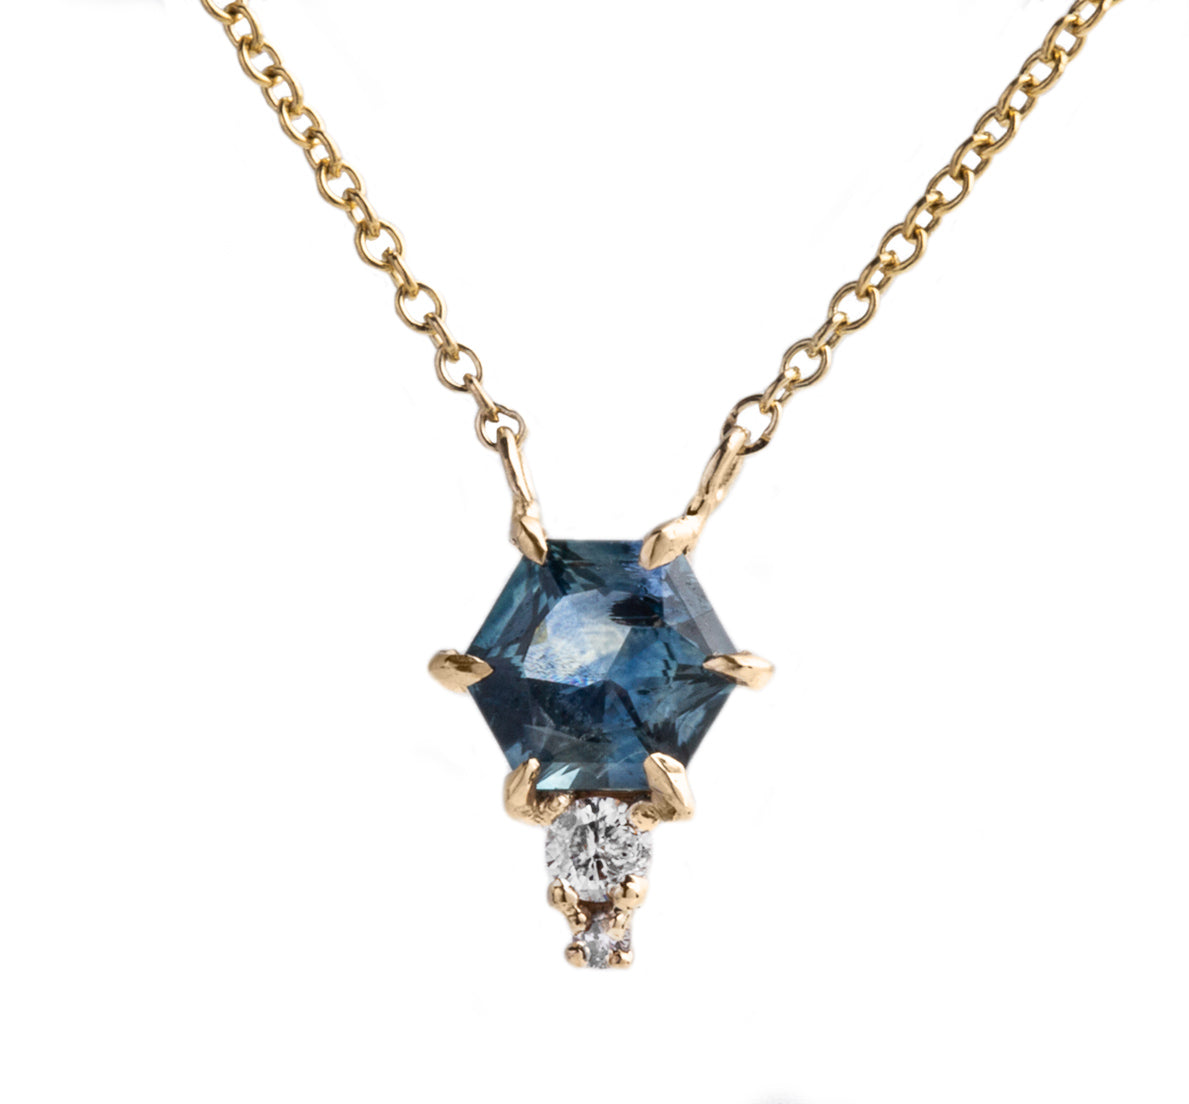 0.70ct hexagon shape Montana sapphire 6 prongs with double diamond accents 14k yellow gold pendant necklace